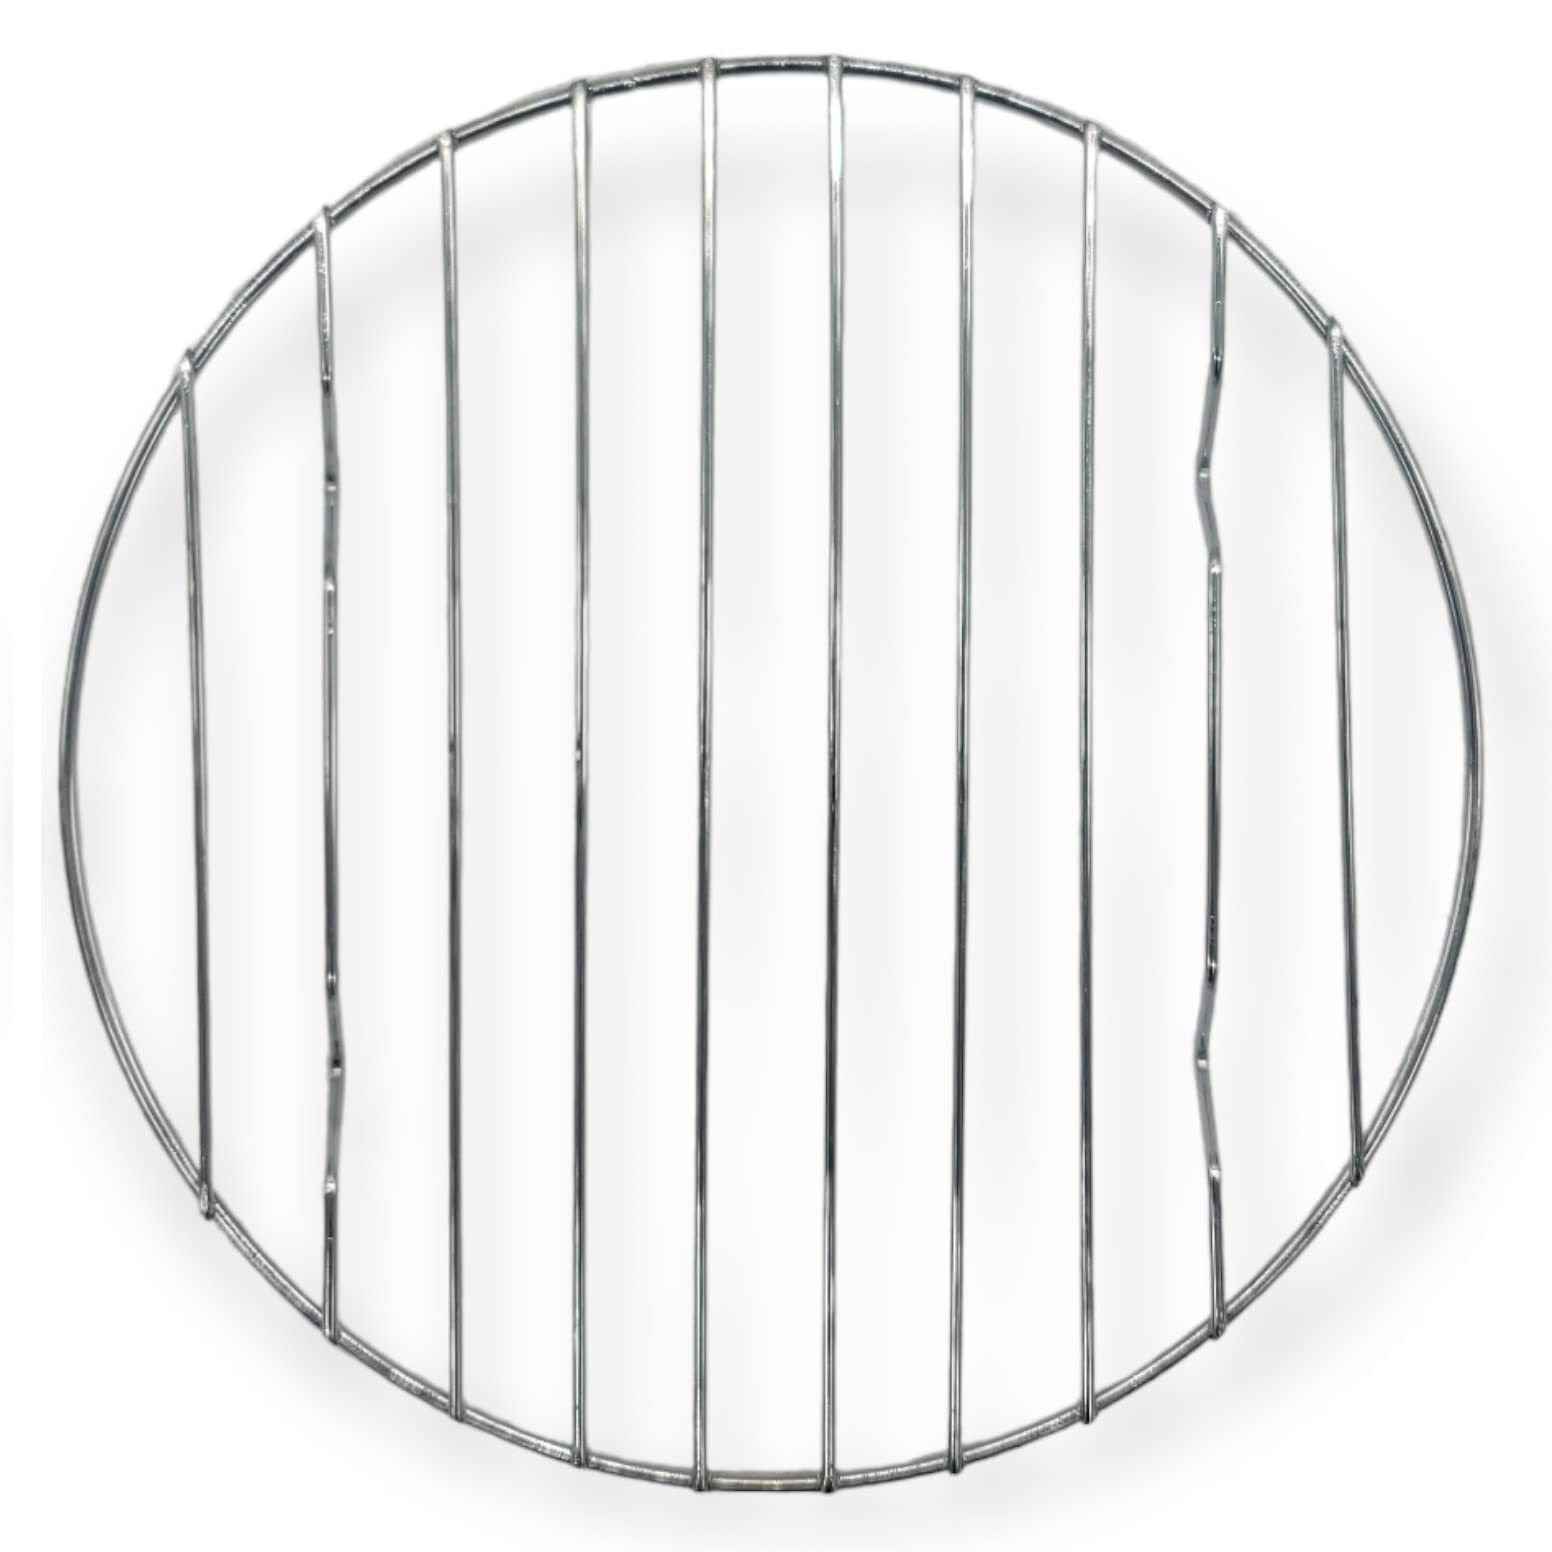 Handy Housewares 8-Inch Round Metal Wire Cake Cooling Rack - Cools Down Pastries or Breads (1-pack)